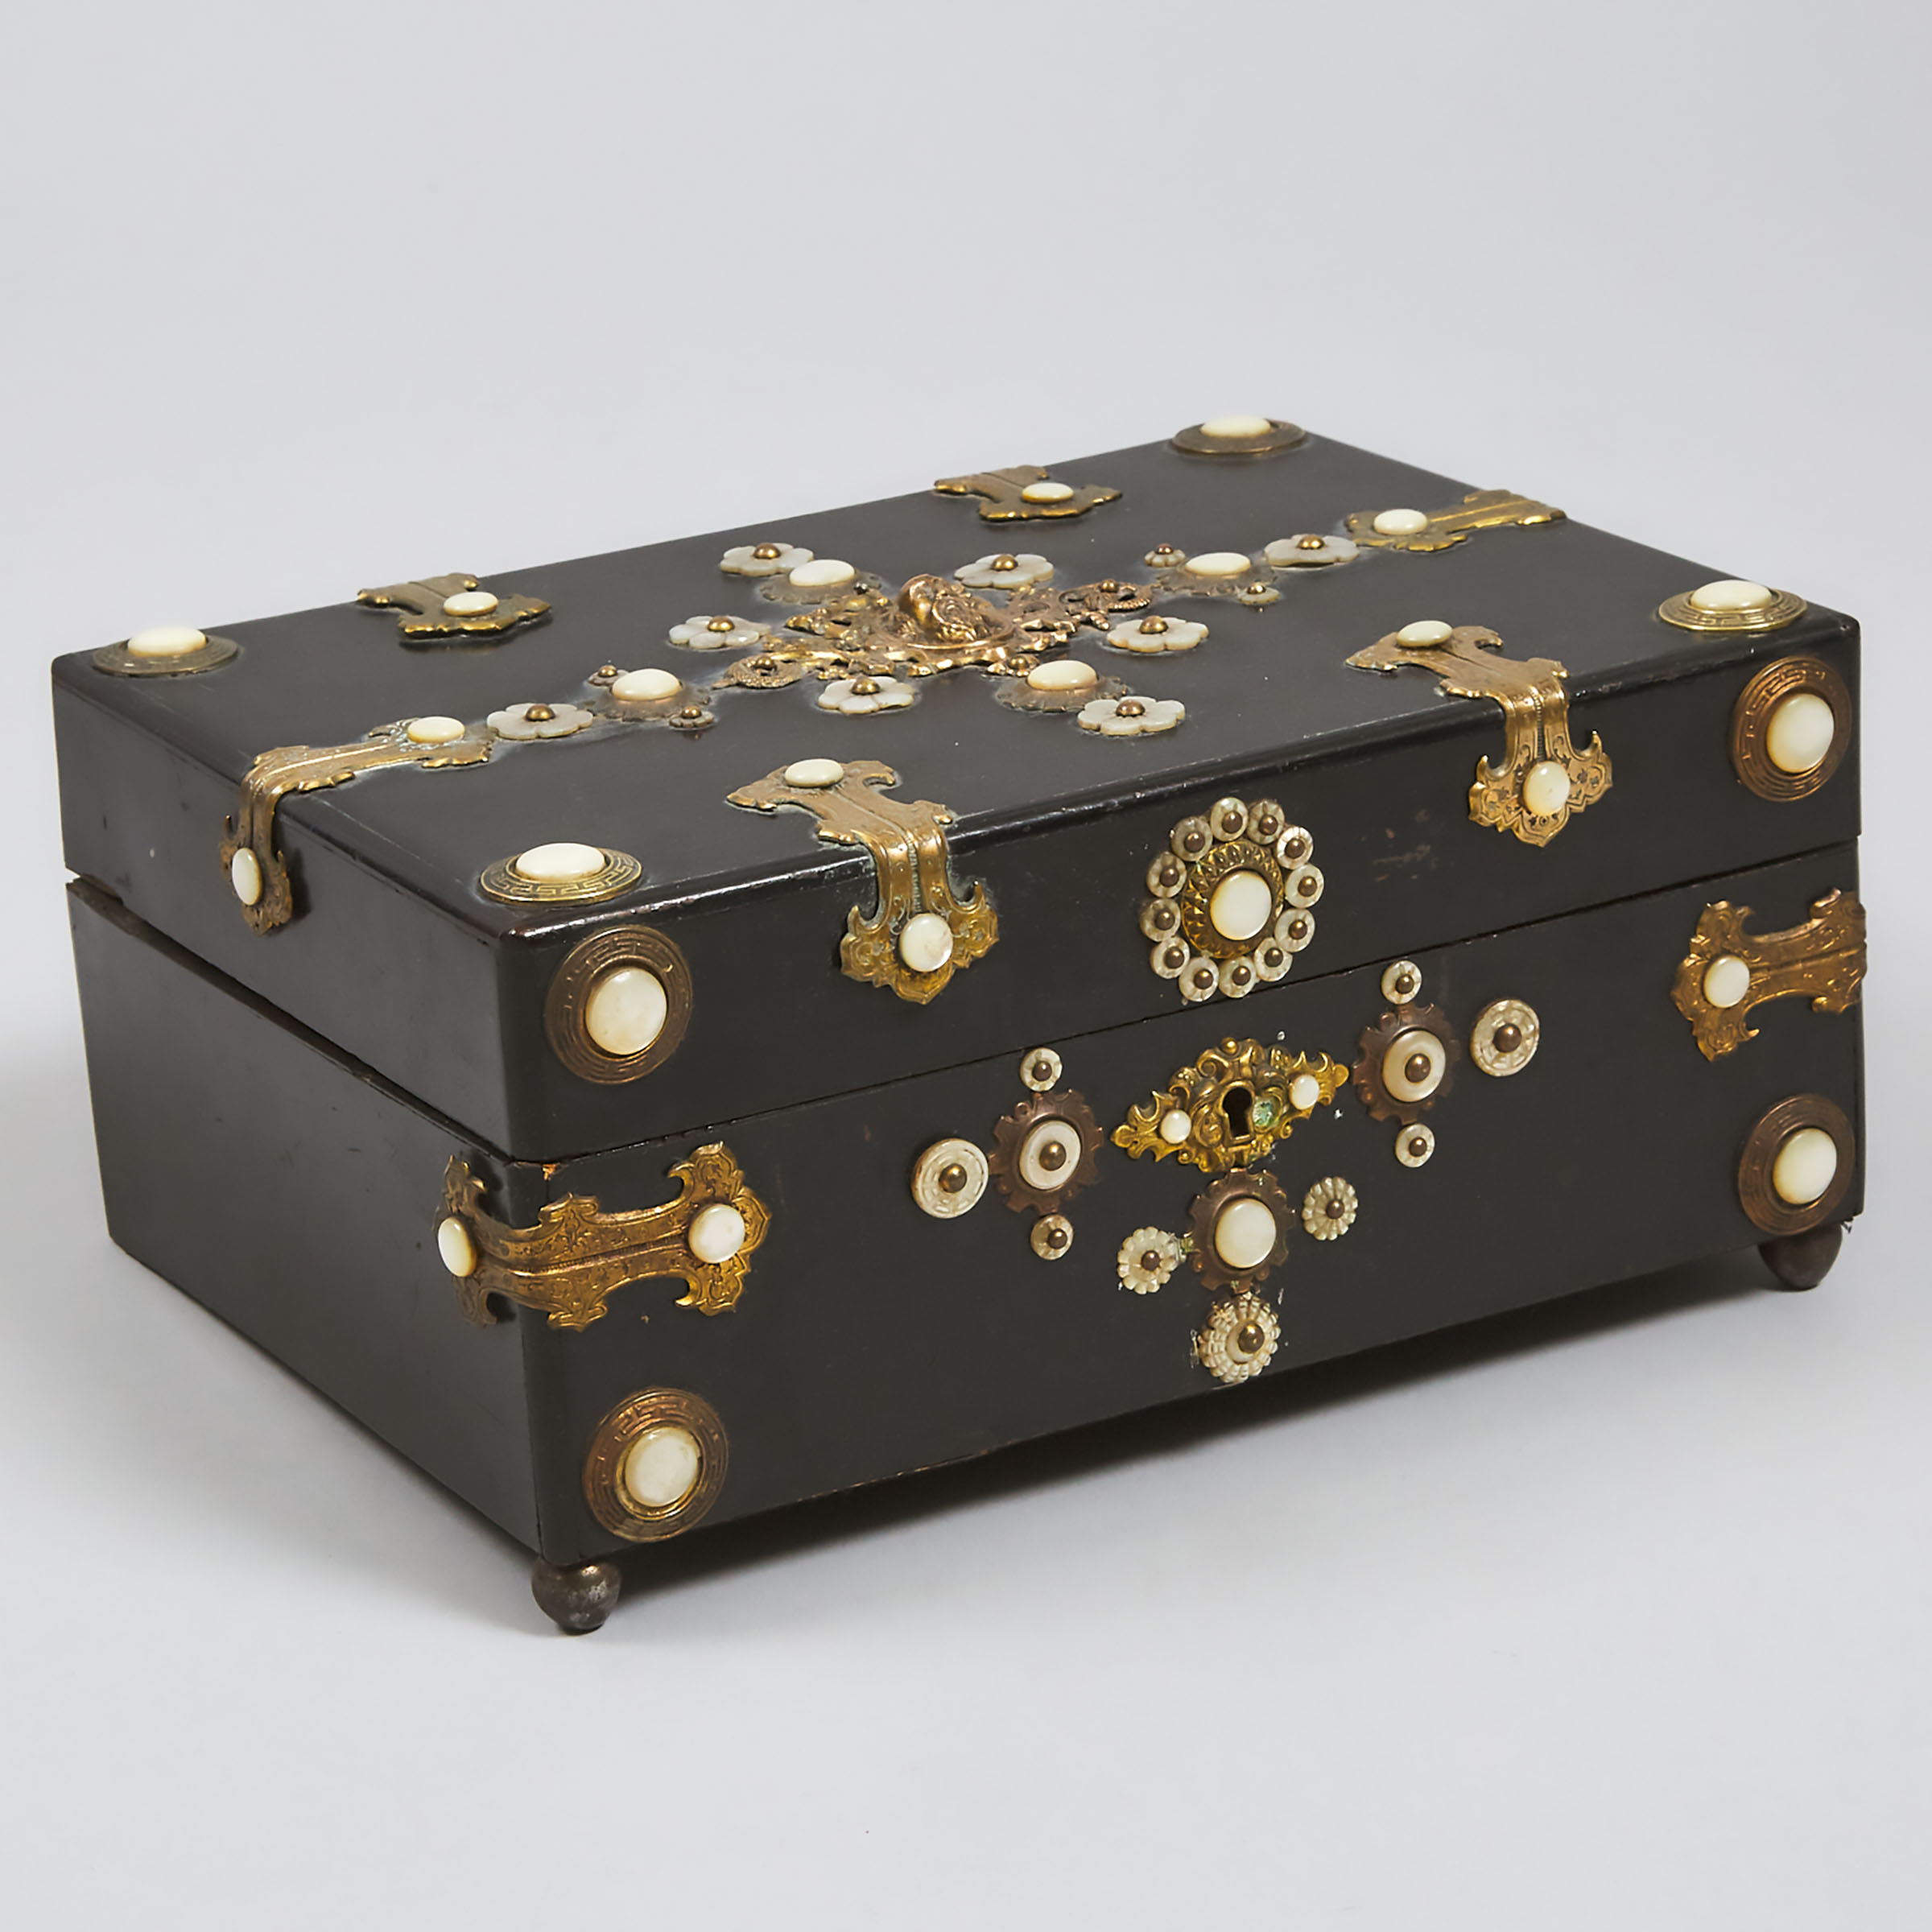 Victorian Renaissance Revival Brass and Mother-of-Pearl Mounted Black Lacquer Casket, mid 19th century